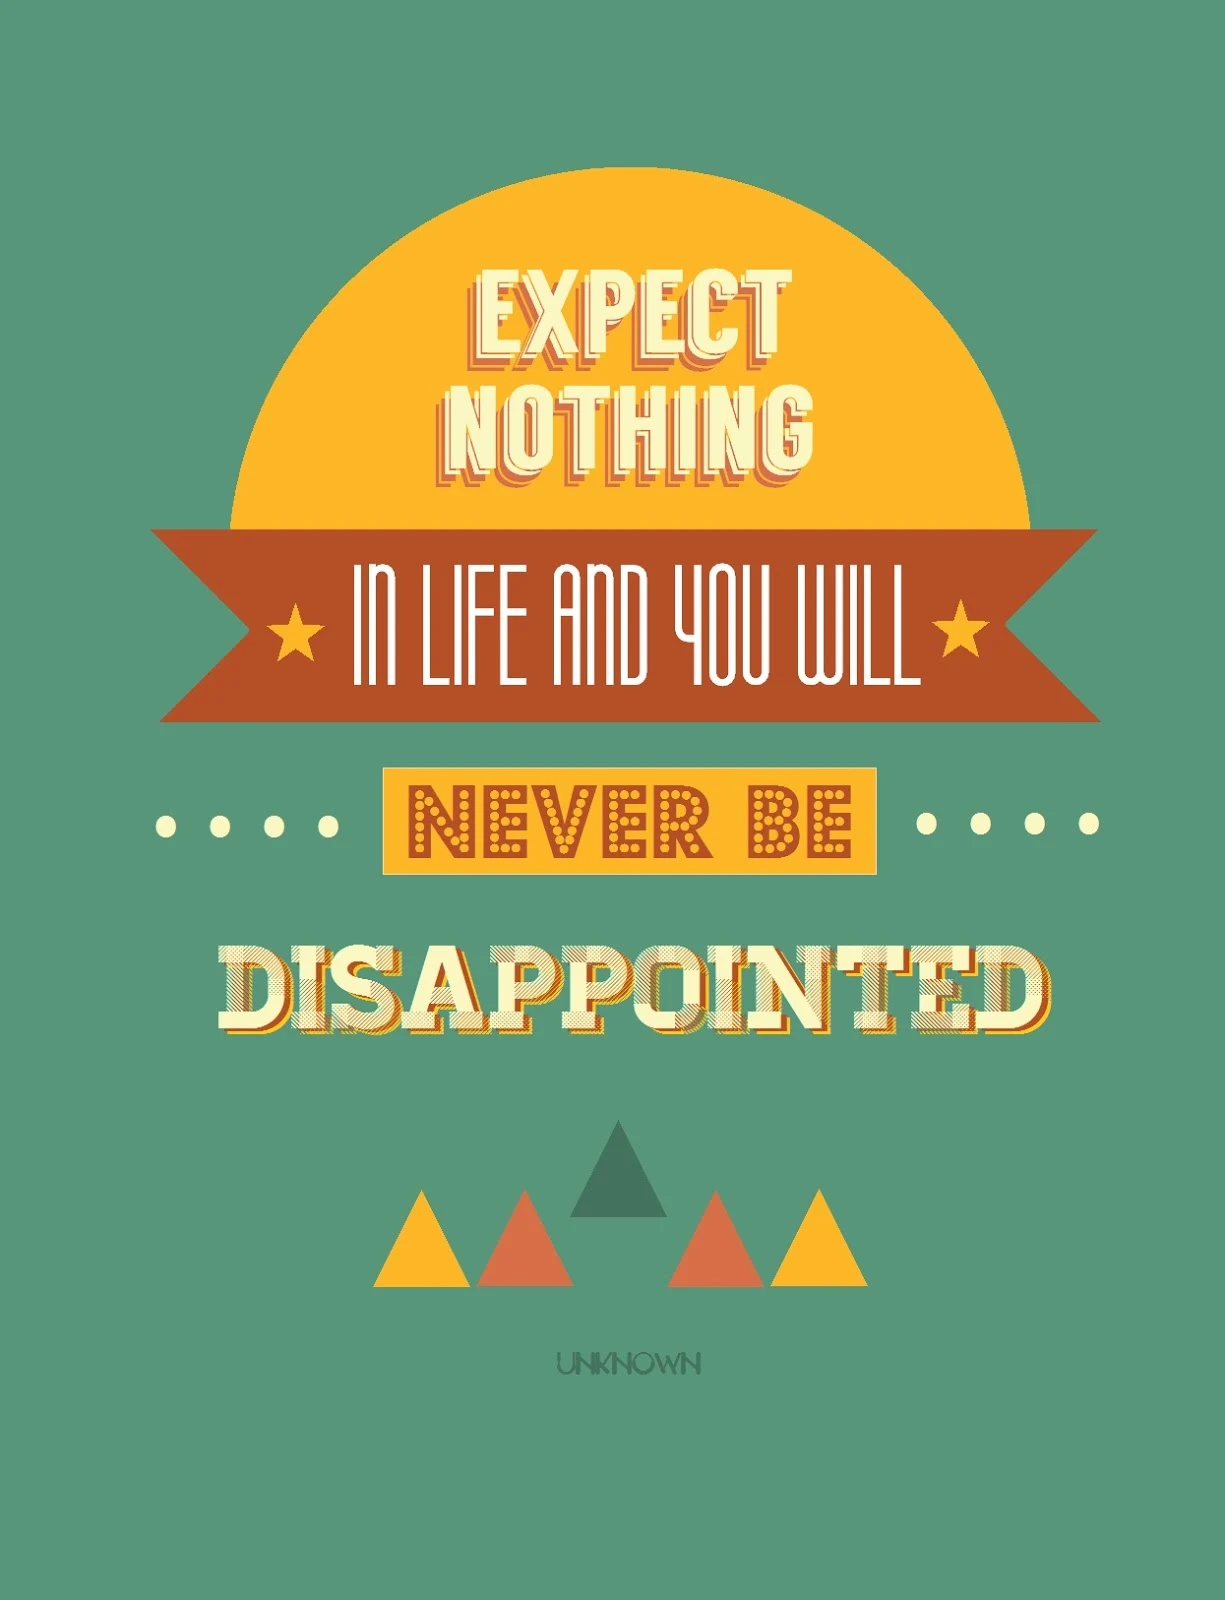 Expect nothing in life and you will never be disappointed.